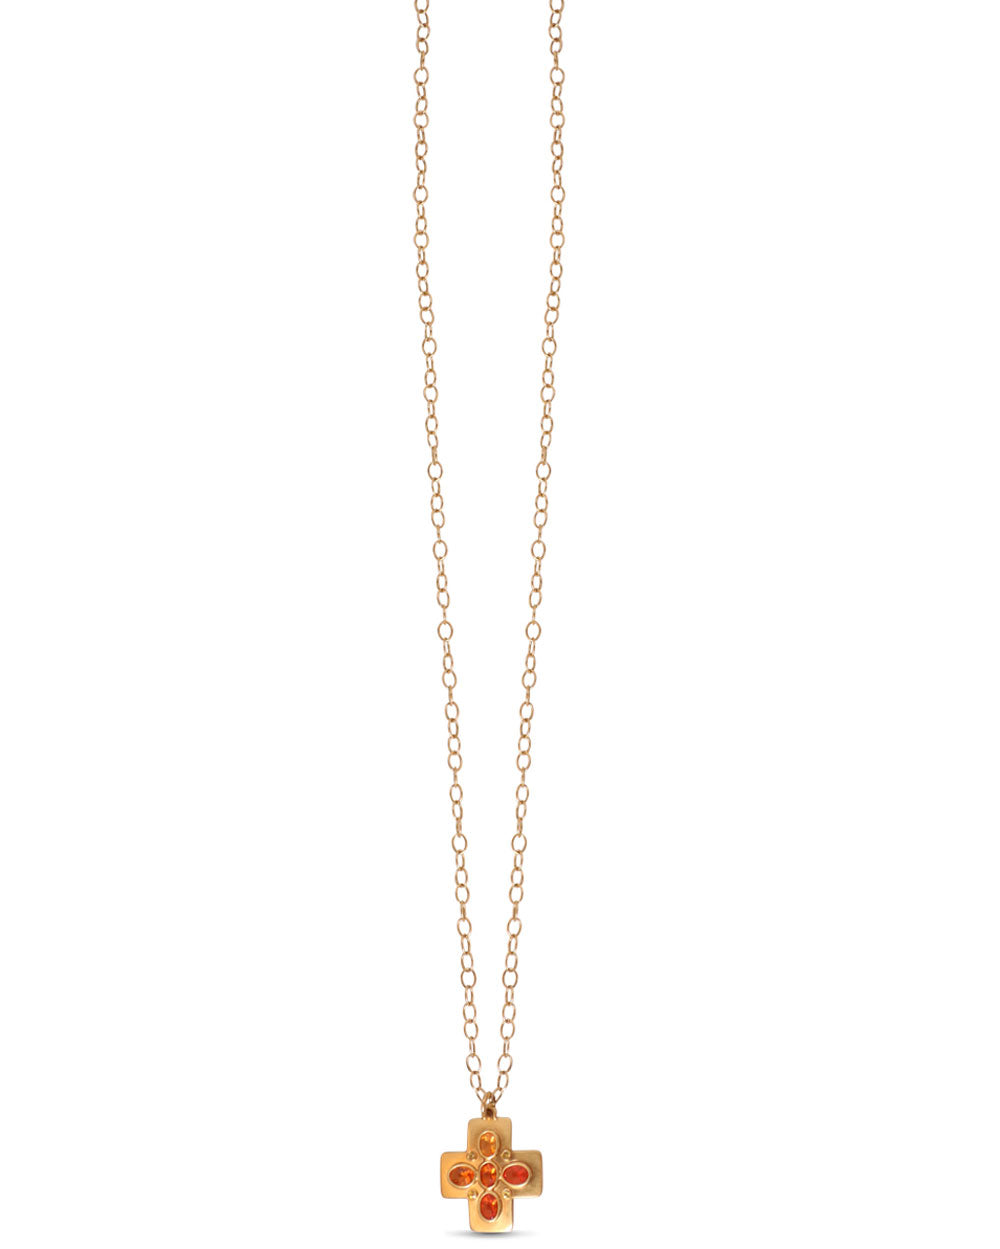 Gold Fire Opal Cross Chain Necklace